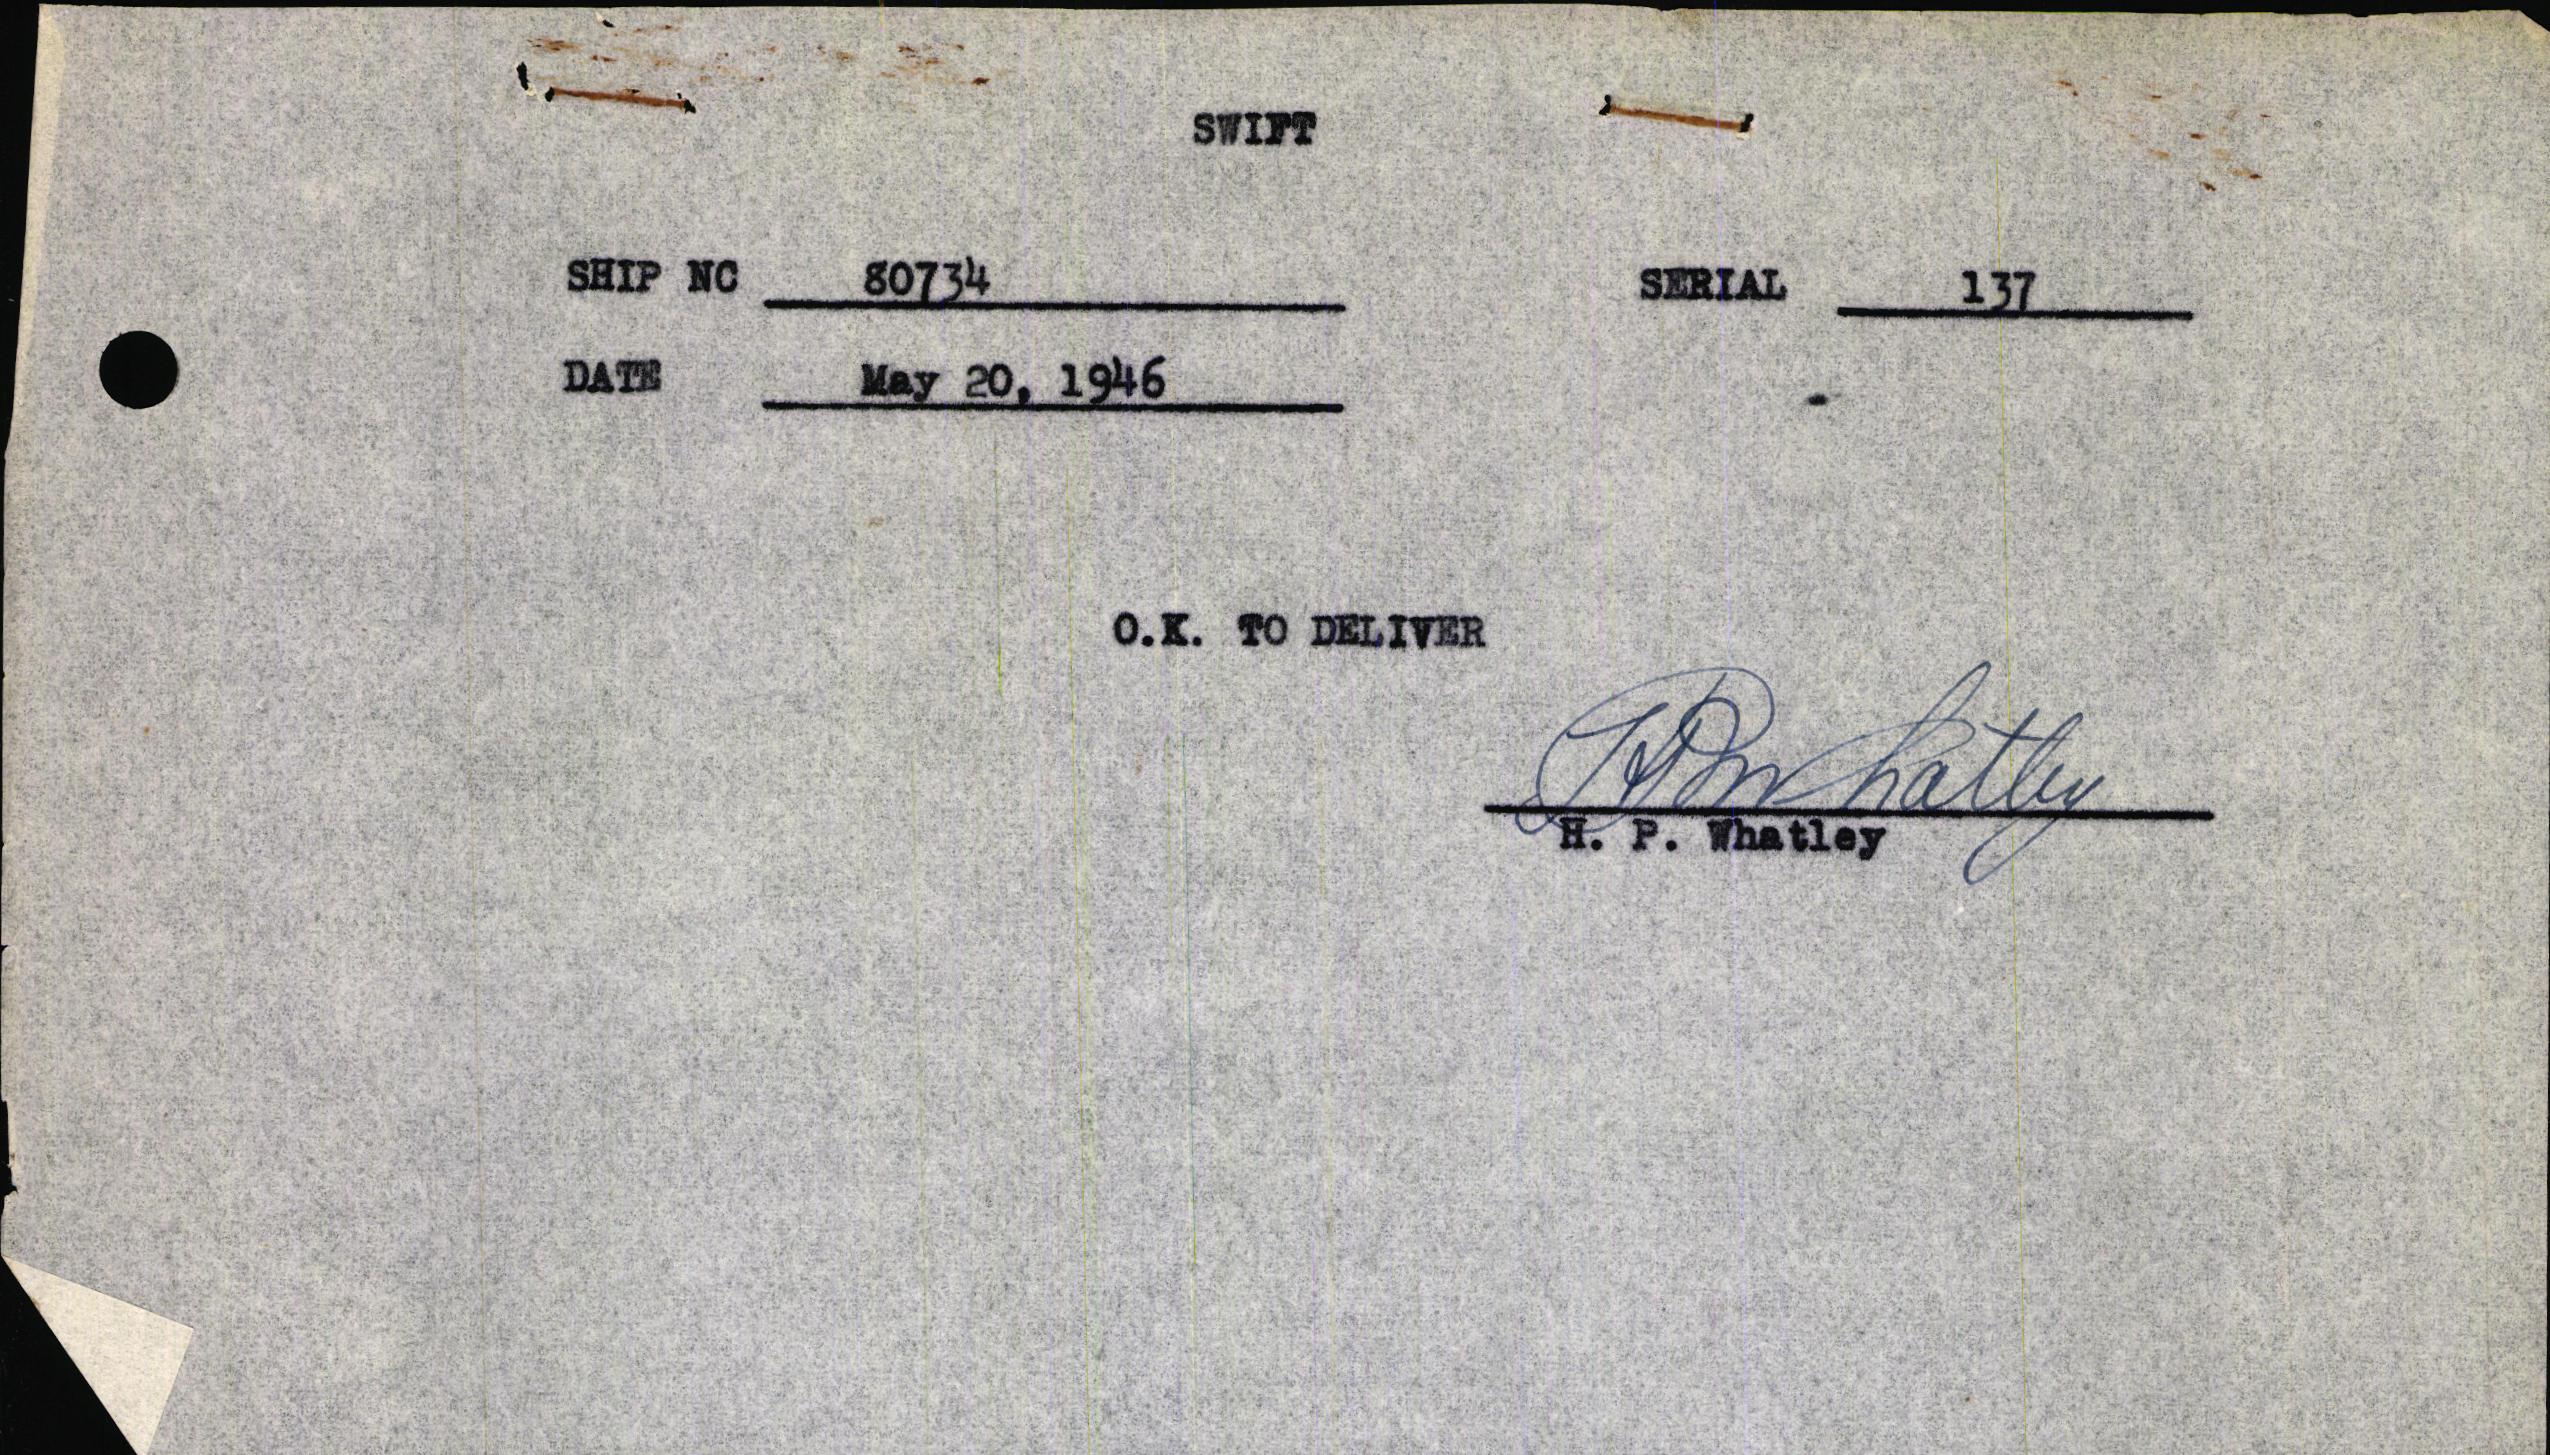 Sample page 3 from AirCorps Library document: Technical Information for Serial Number 137